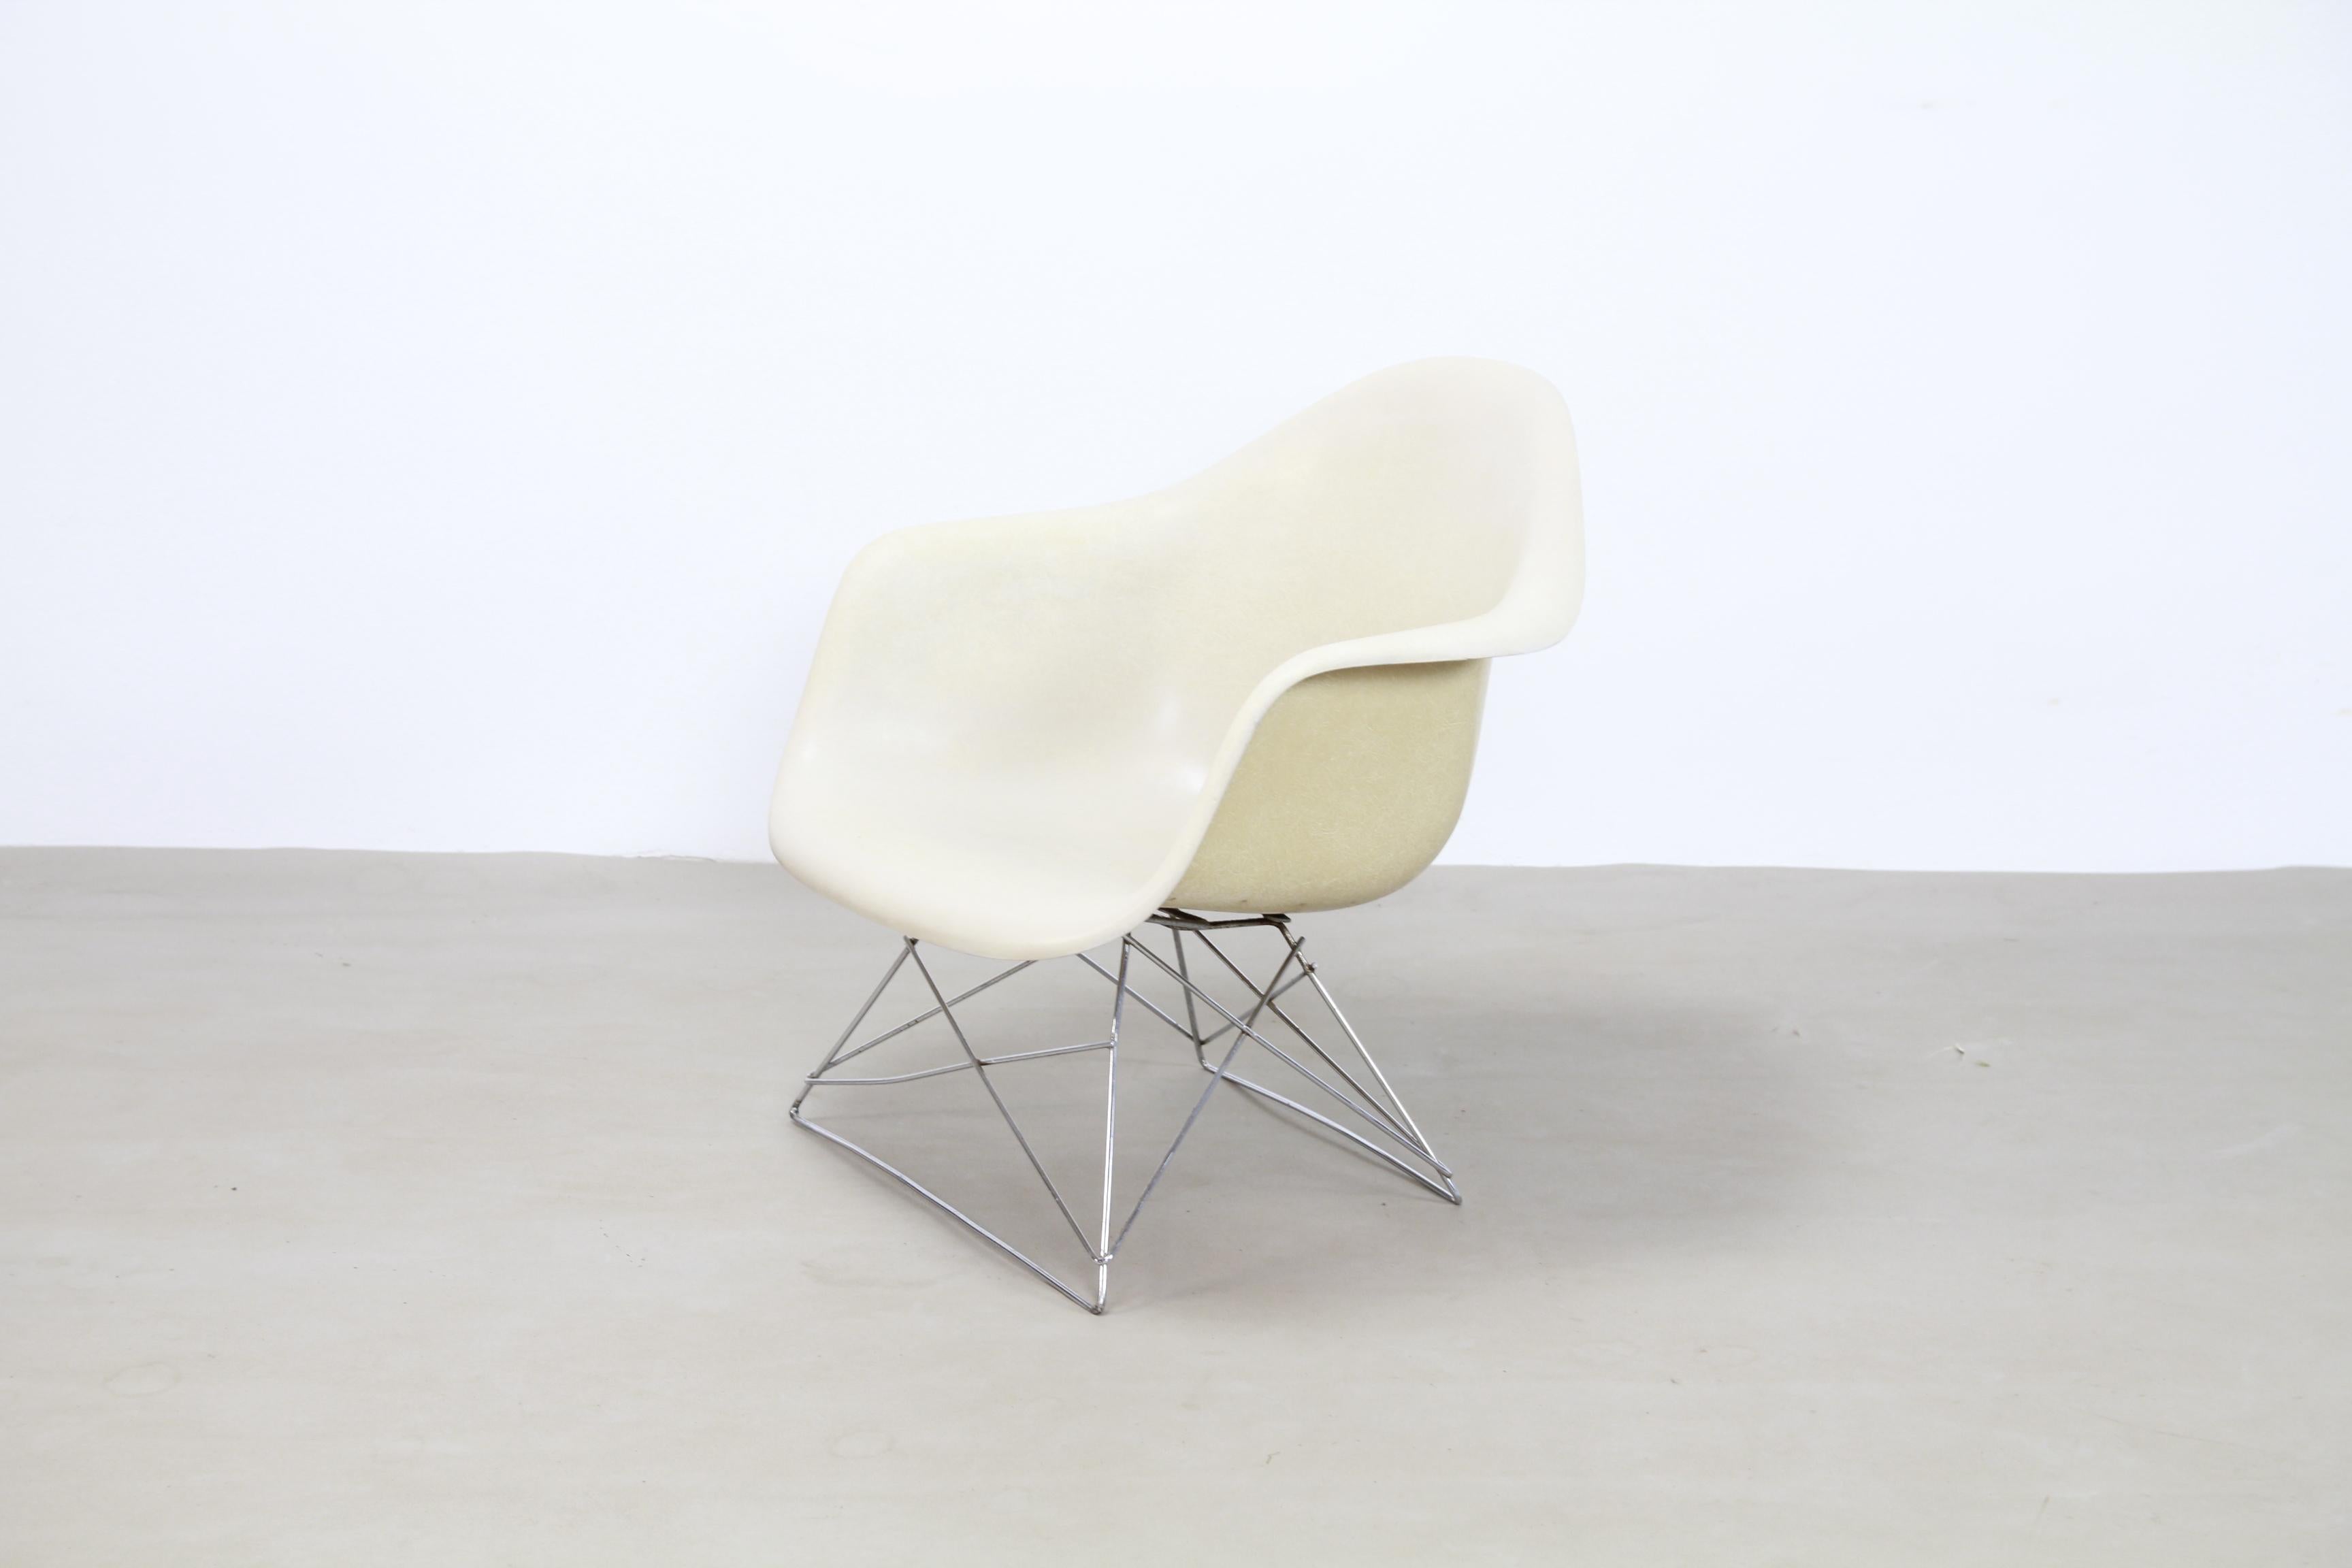 Beautiful fiberglass armchair designed by Ray and Charles Eames and produced by Herman Miller. Special about this chair is the original Low Rod base. This makes this armchair different from the other designs by Ray and Charles Eames from that time,